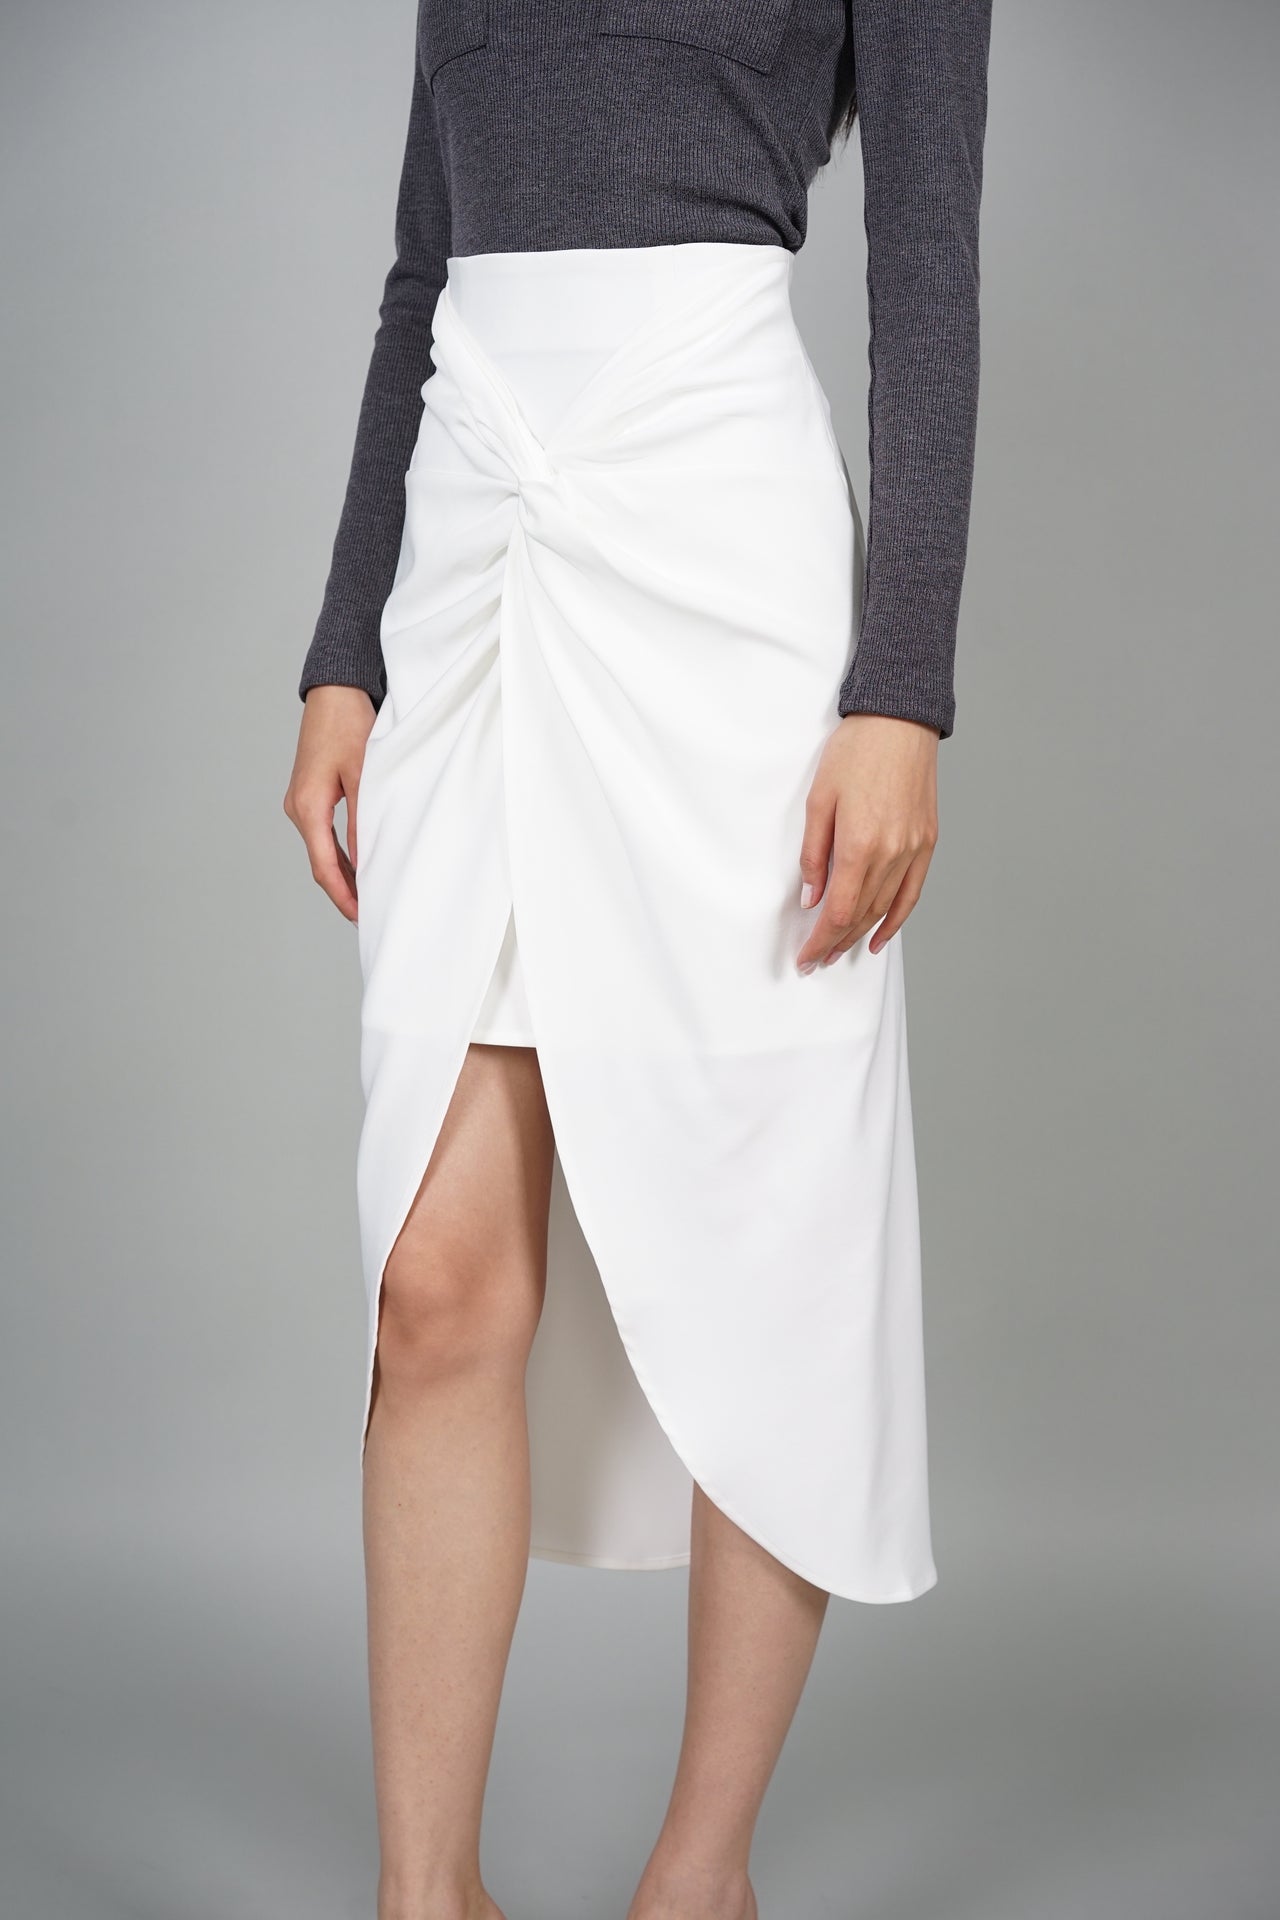 Scarlette Ruched Midi Skirt in White